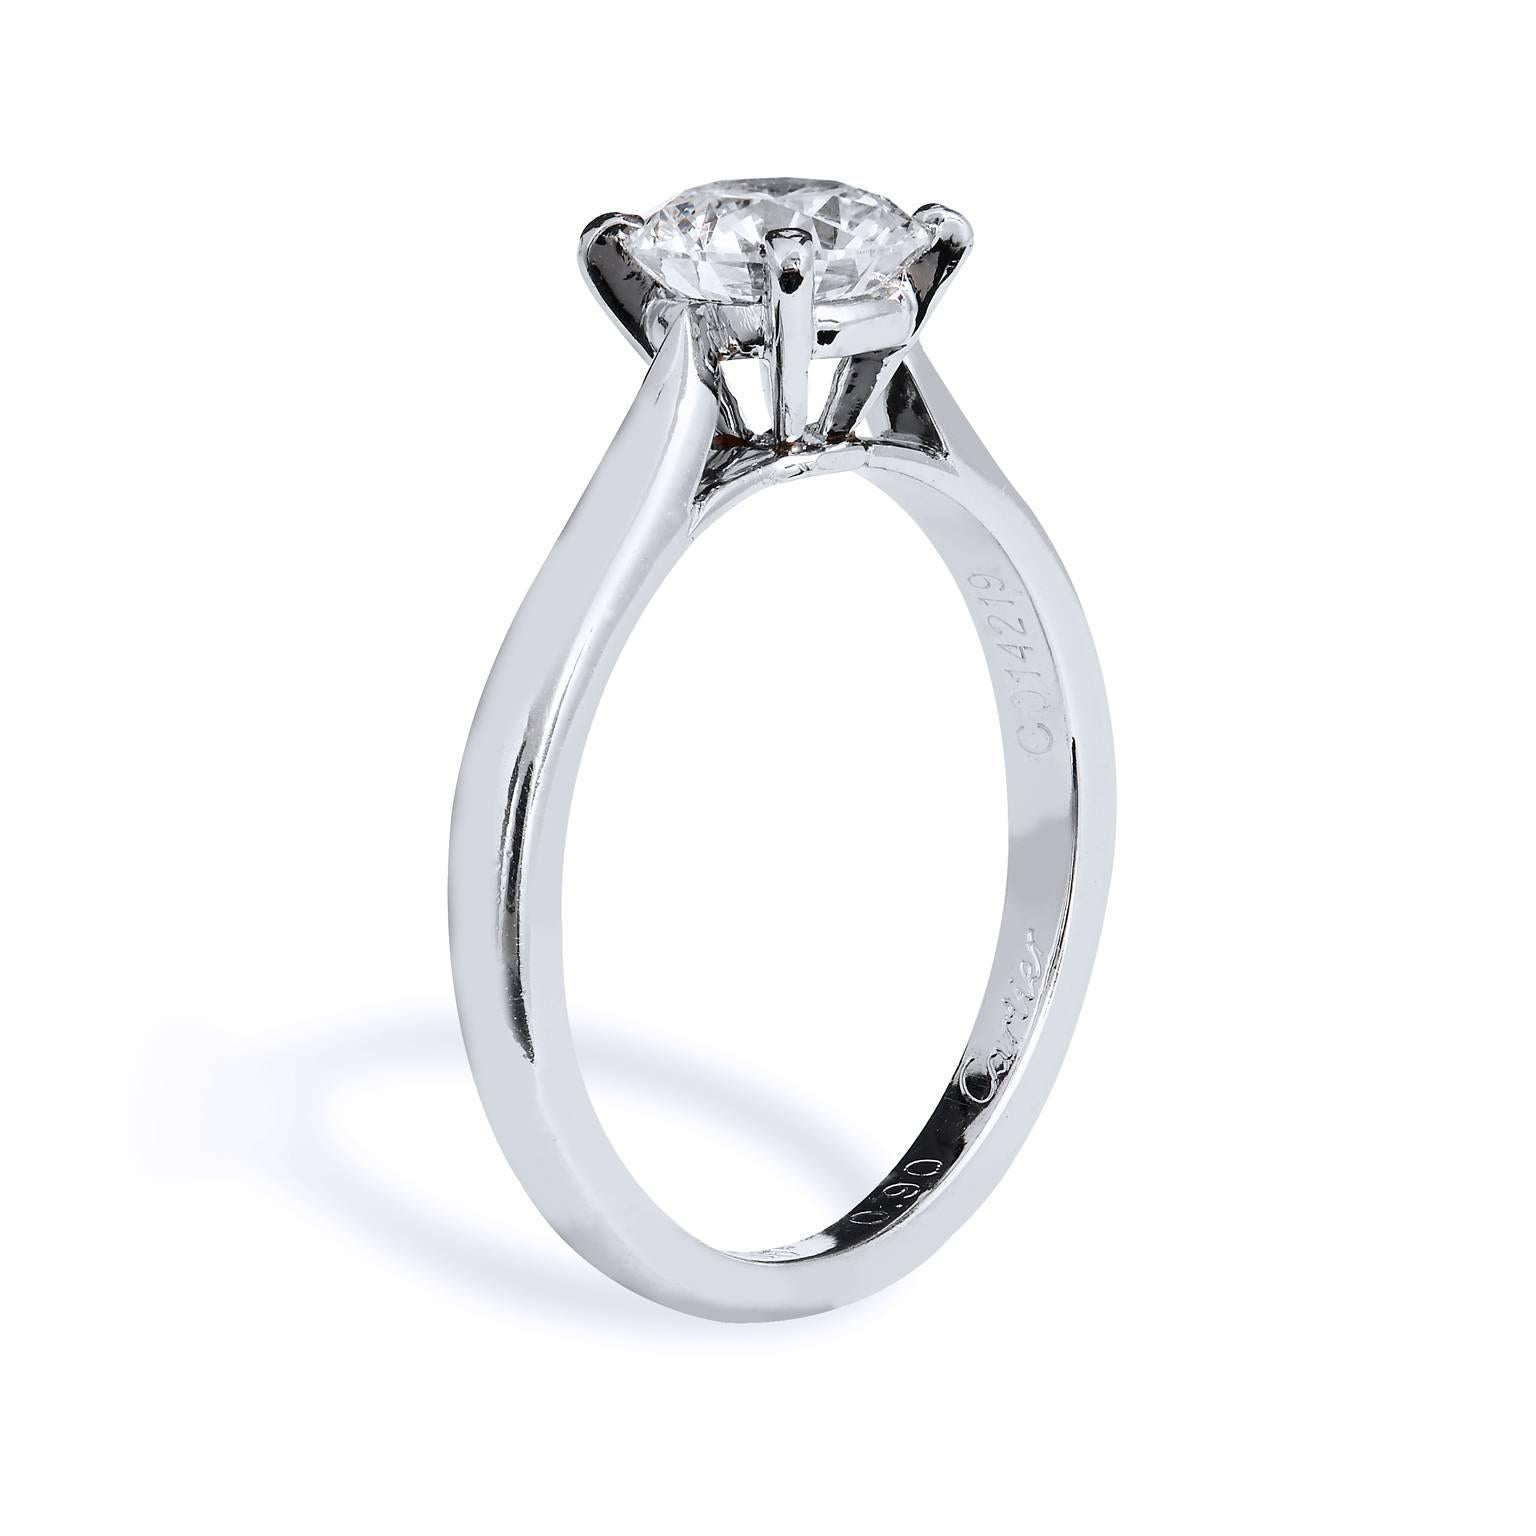 This platinum Cartier engagement ring features a simple and elegant solitaire design allowing the full beauty of the diamond to shine bright. The piece showcases a GIA certified .90ct F/VS2 round brilliant cut diamond and deemed authentic with a